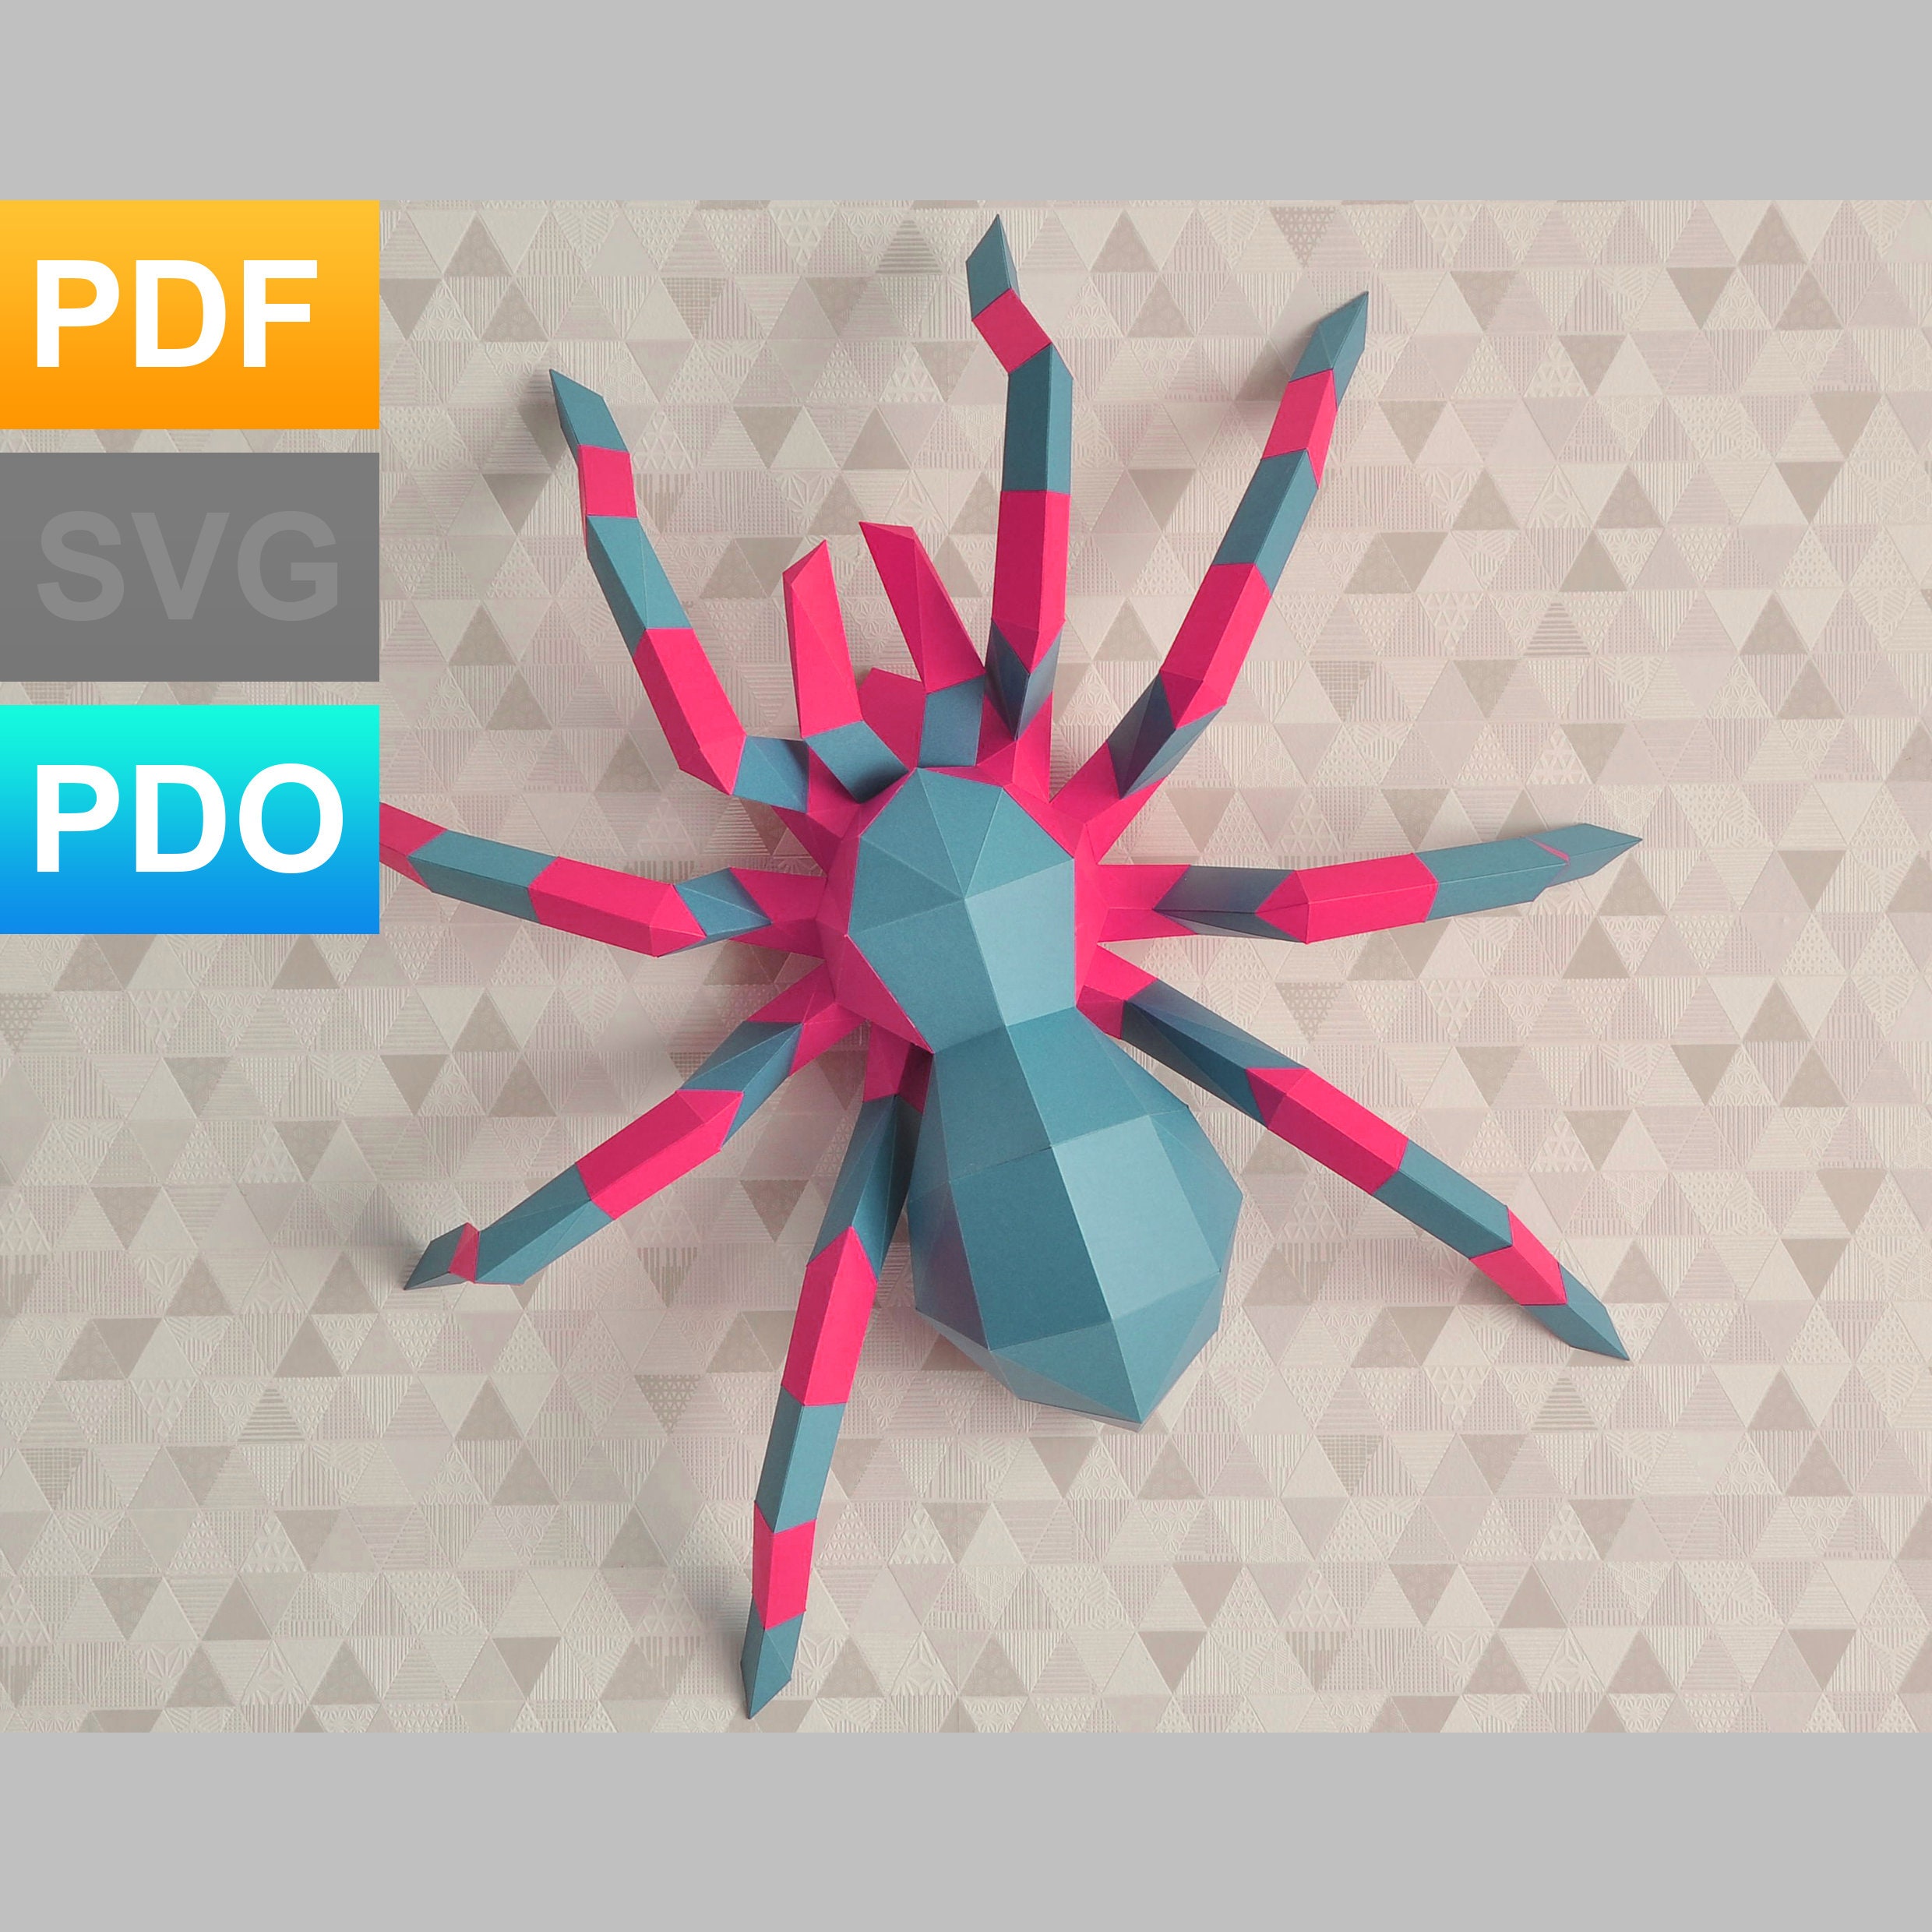 Spiderman Busto, Spiderman Low Poly, Papercraft, PDF Template, Paper Model,  Sculpture, 3D Puzzle, Polygonal Model. -  Hong Kong